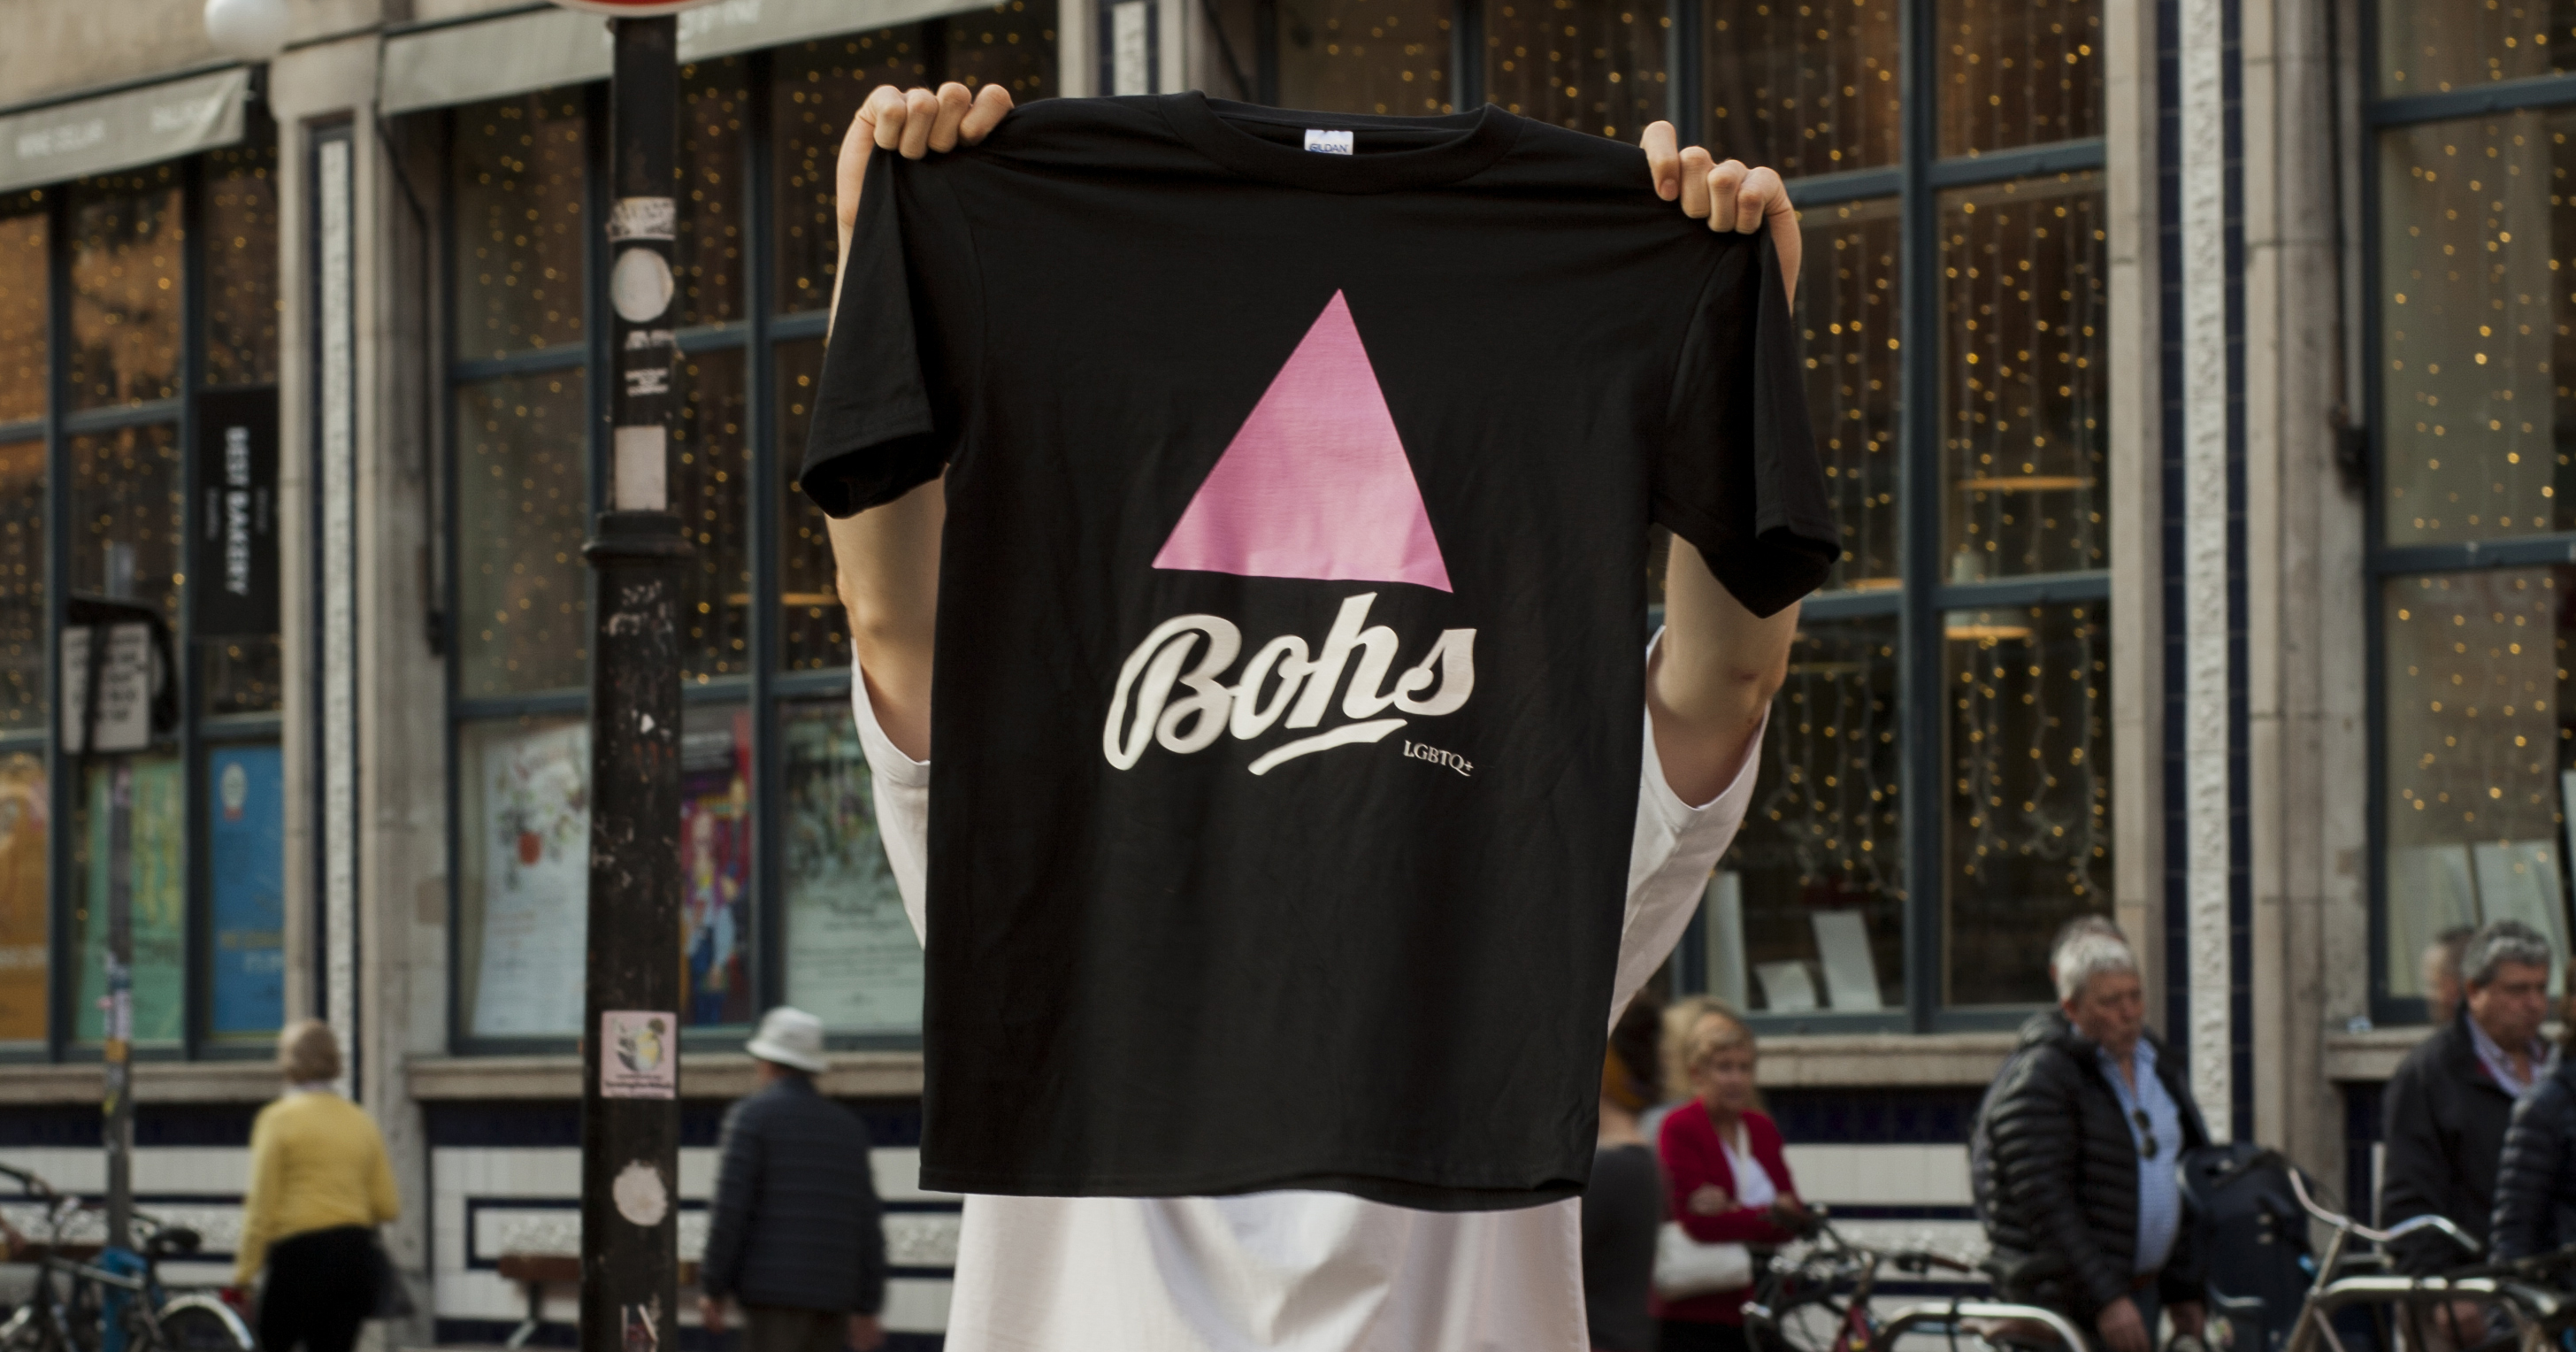 A person on the street holding up t-shirt fan wear with a pink triangle and the Bohemians club logo